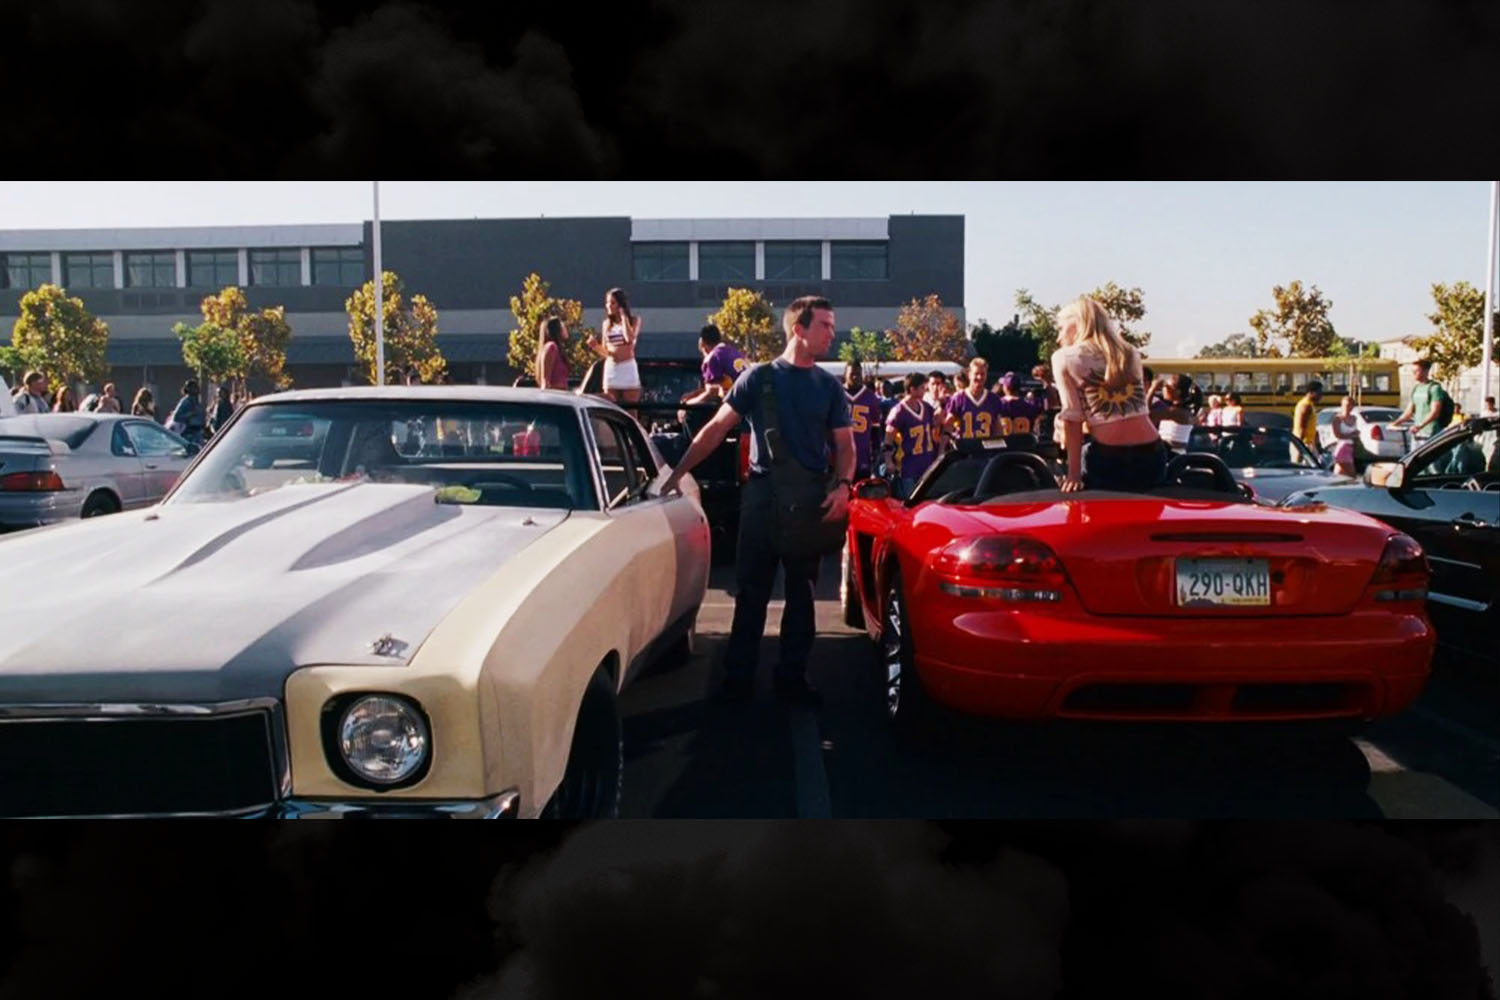 Sean Boswell's 1971 Chevrolet Monte Carlo sitting in the school parking lot during the opening scenes of The Fast and the Furious: Tokyo Drift